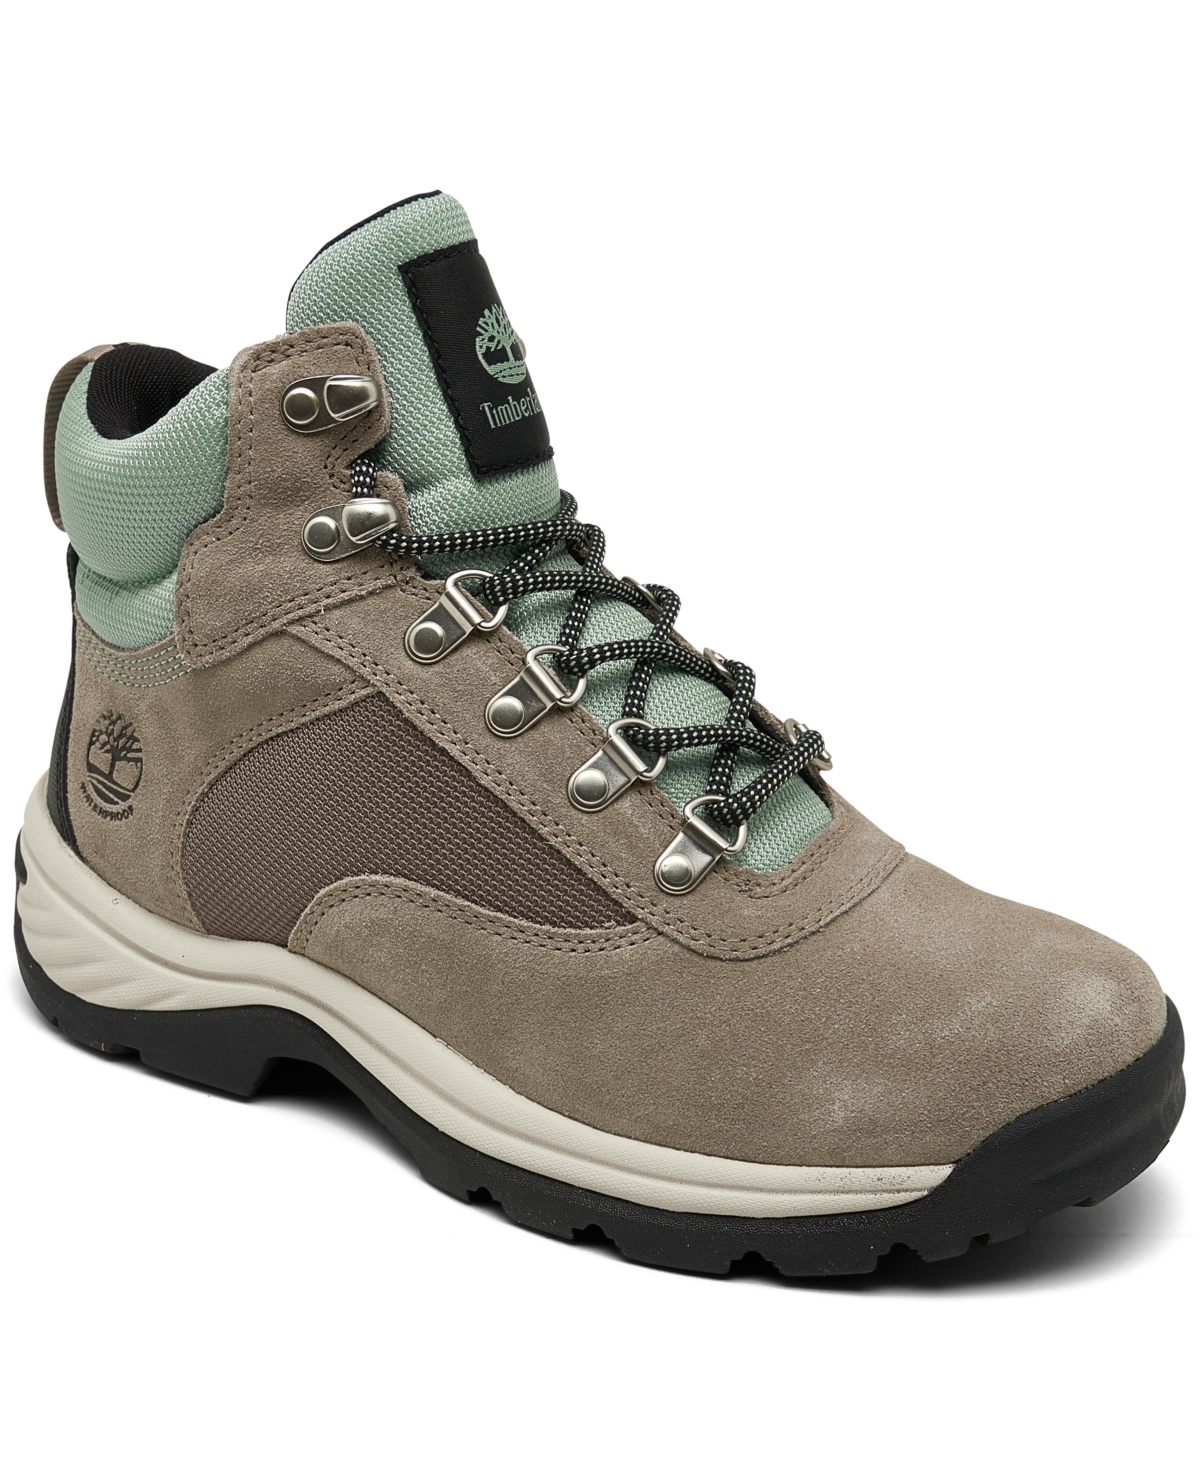 TIMBERLAND WOMEN'S WHITE LEDGE WATER-RESISTANT HIKING BOOTS FROM FINISH LINE